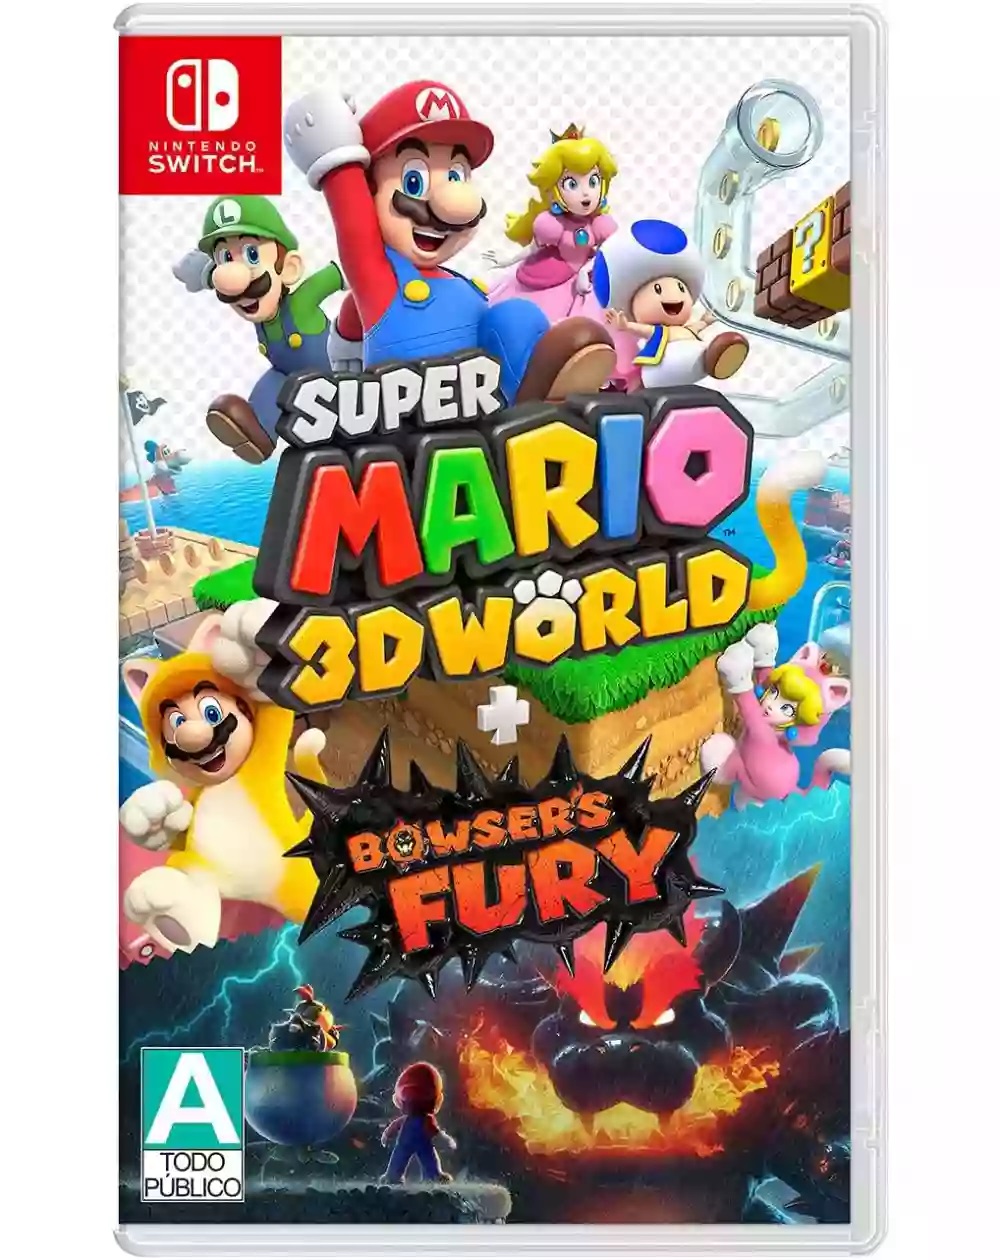 SUPER MARIO 3D WORLD + BOWSERS FURY NSW